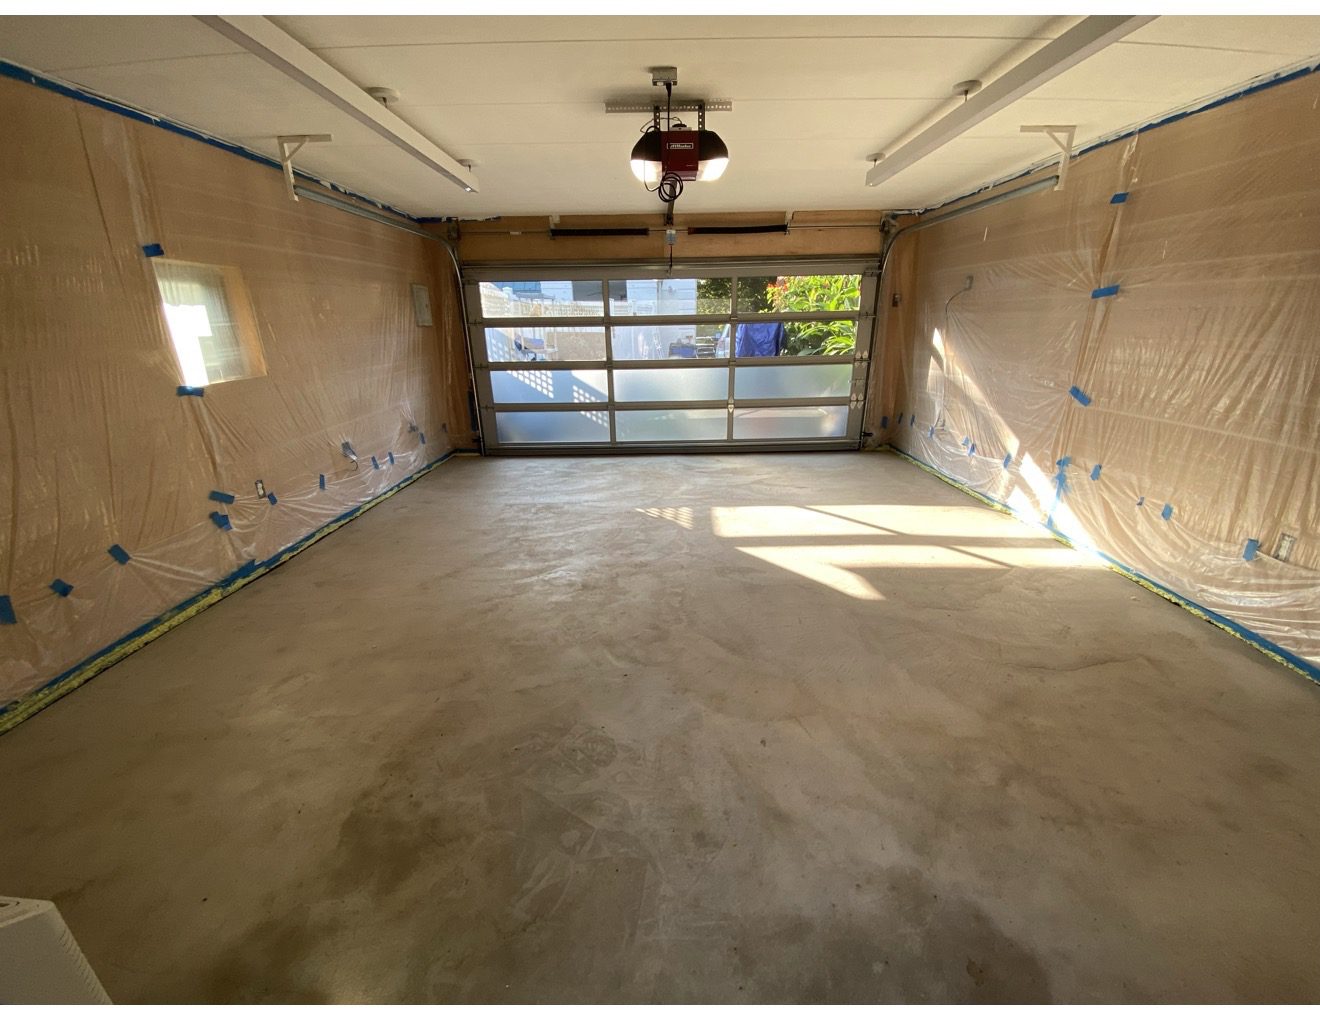 Picture of an old garage with an old concrete floor